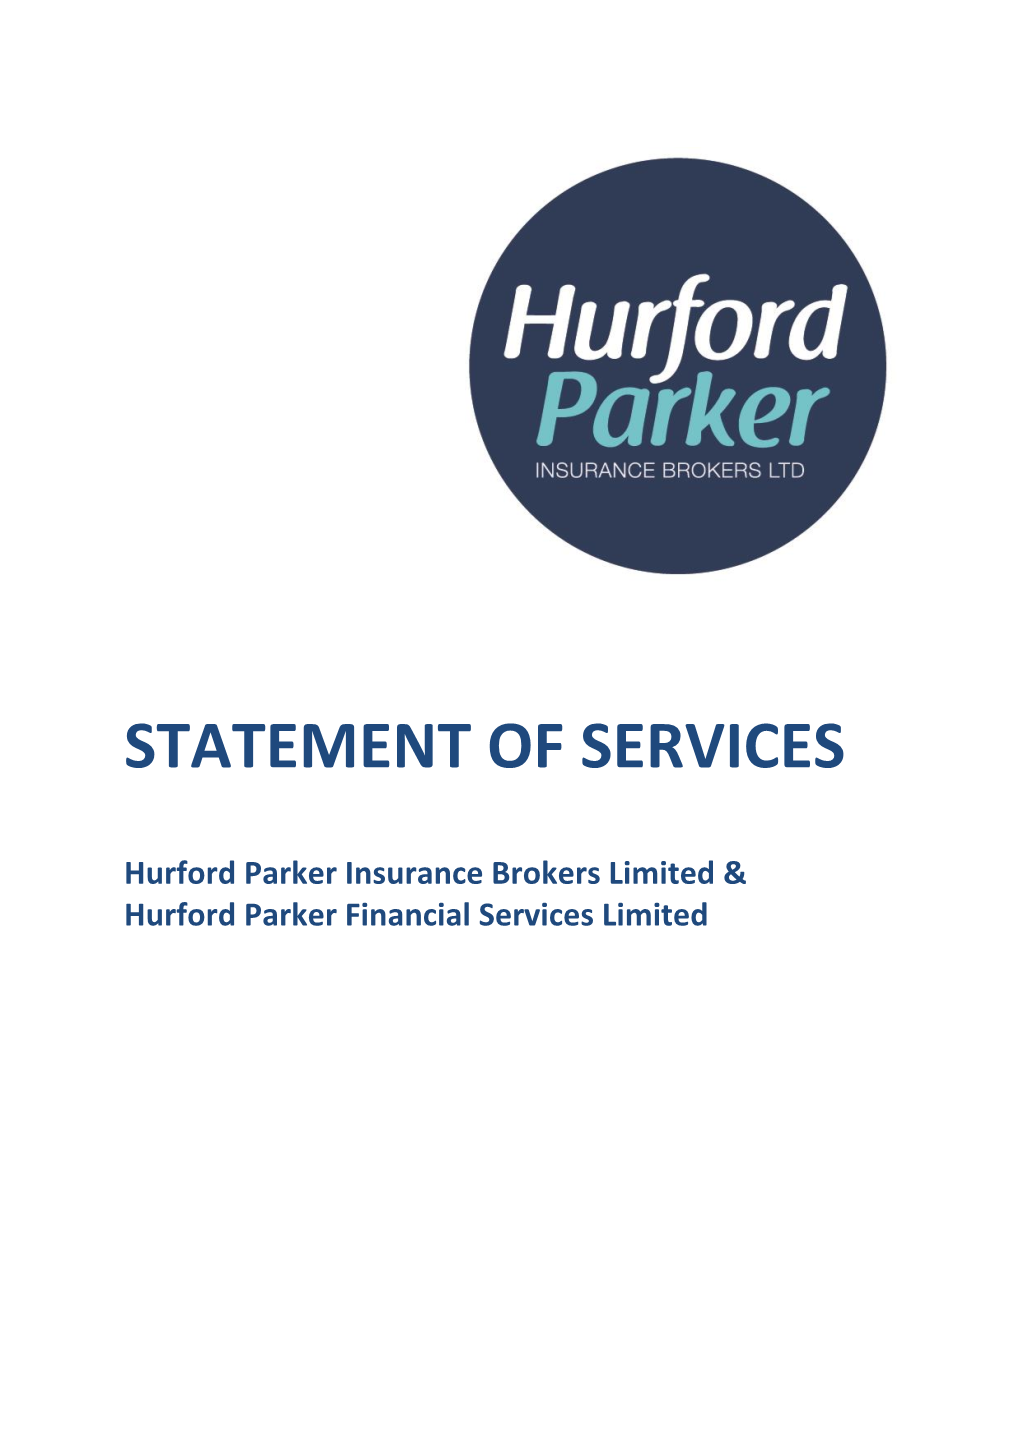 Statement of Services